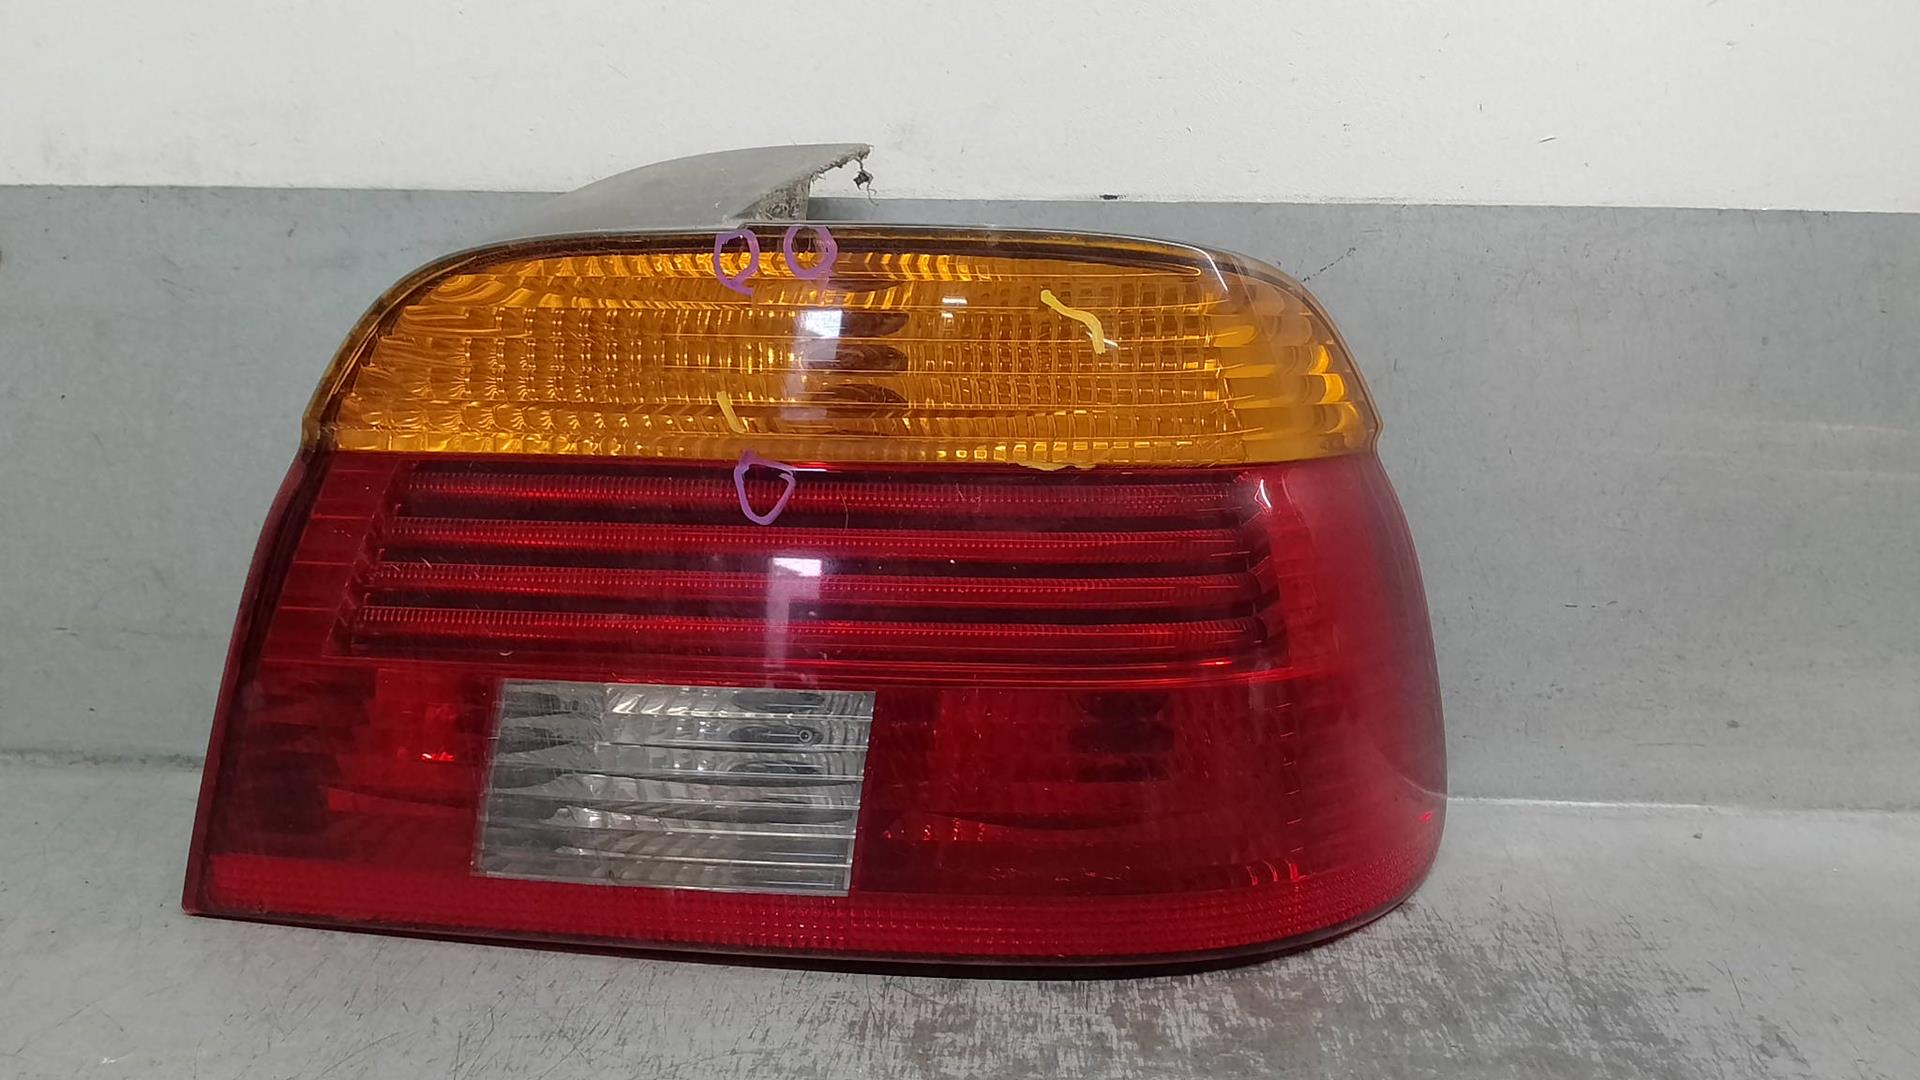 BMW 5 Series E39 (1995-2004) Rear Right Taillight Lamp 63216900210, 4PUERTAS 24219965